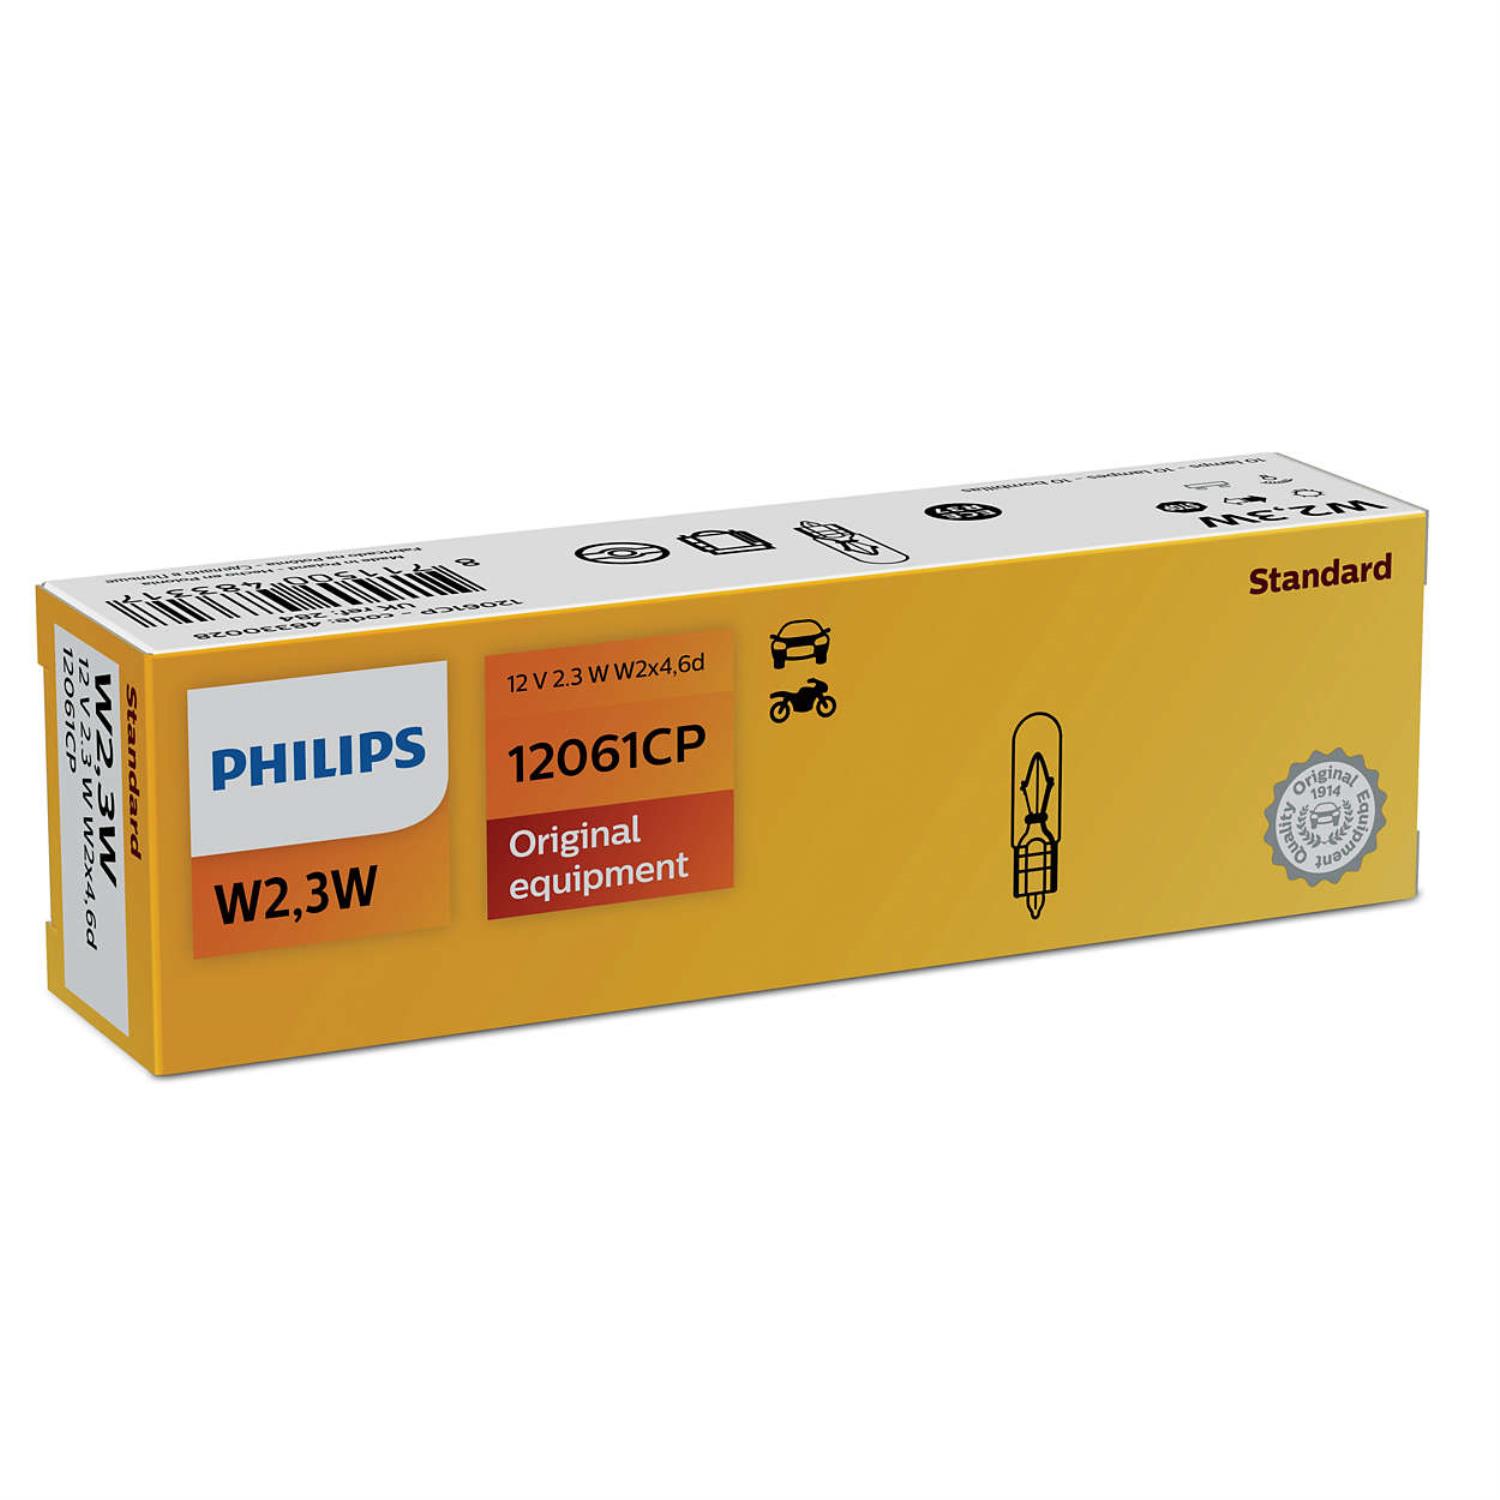 PHILIPS 12061CP Glühlampe Beleuchtung